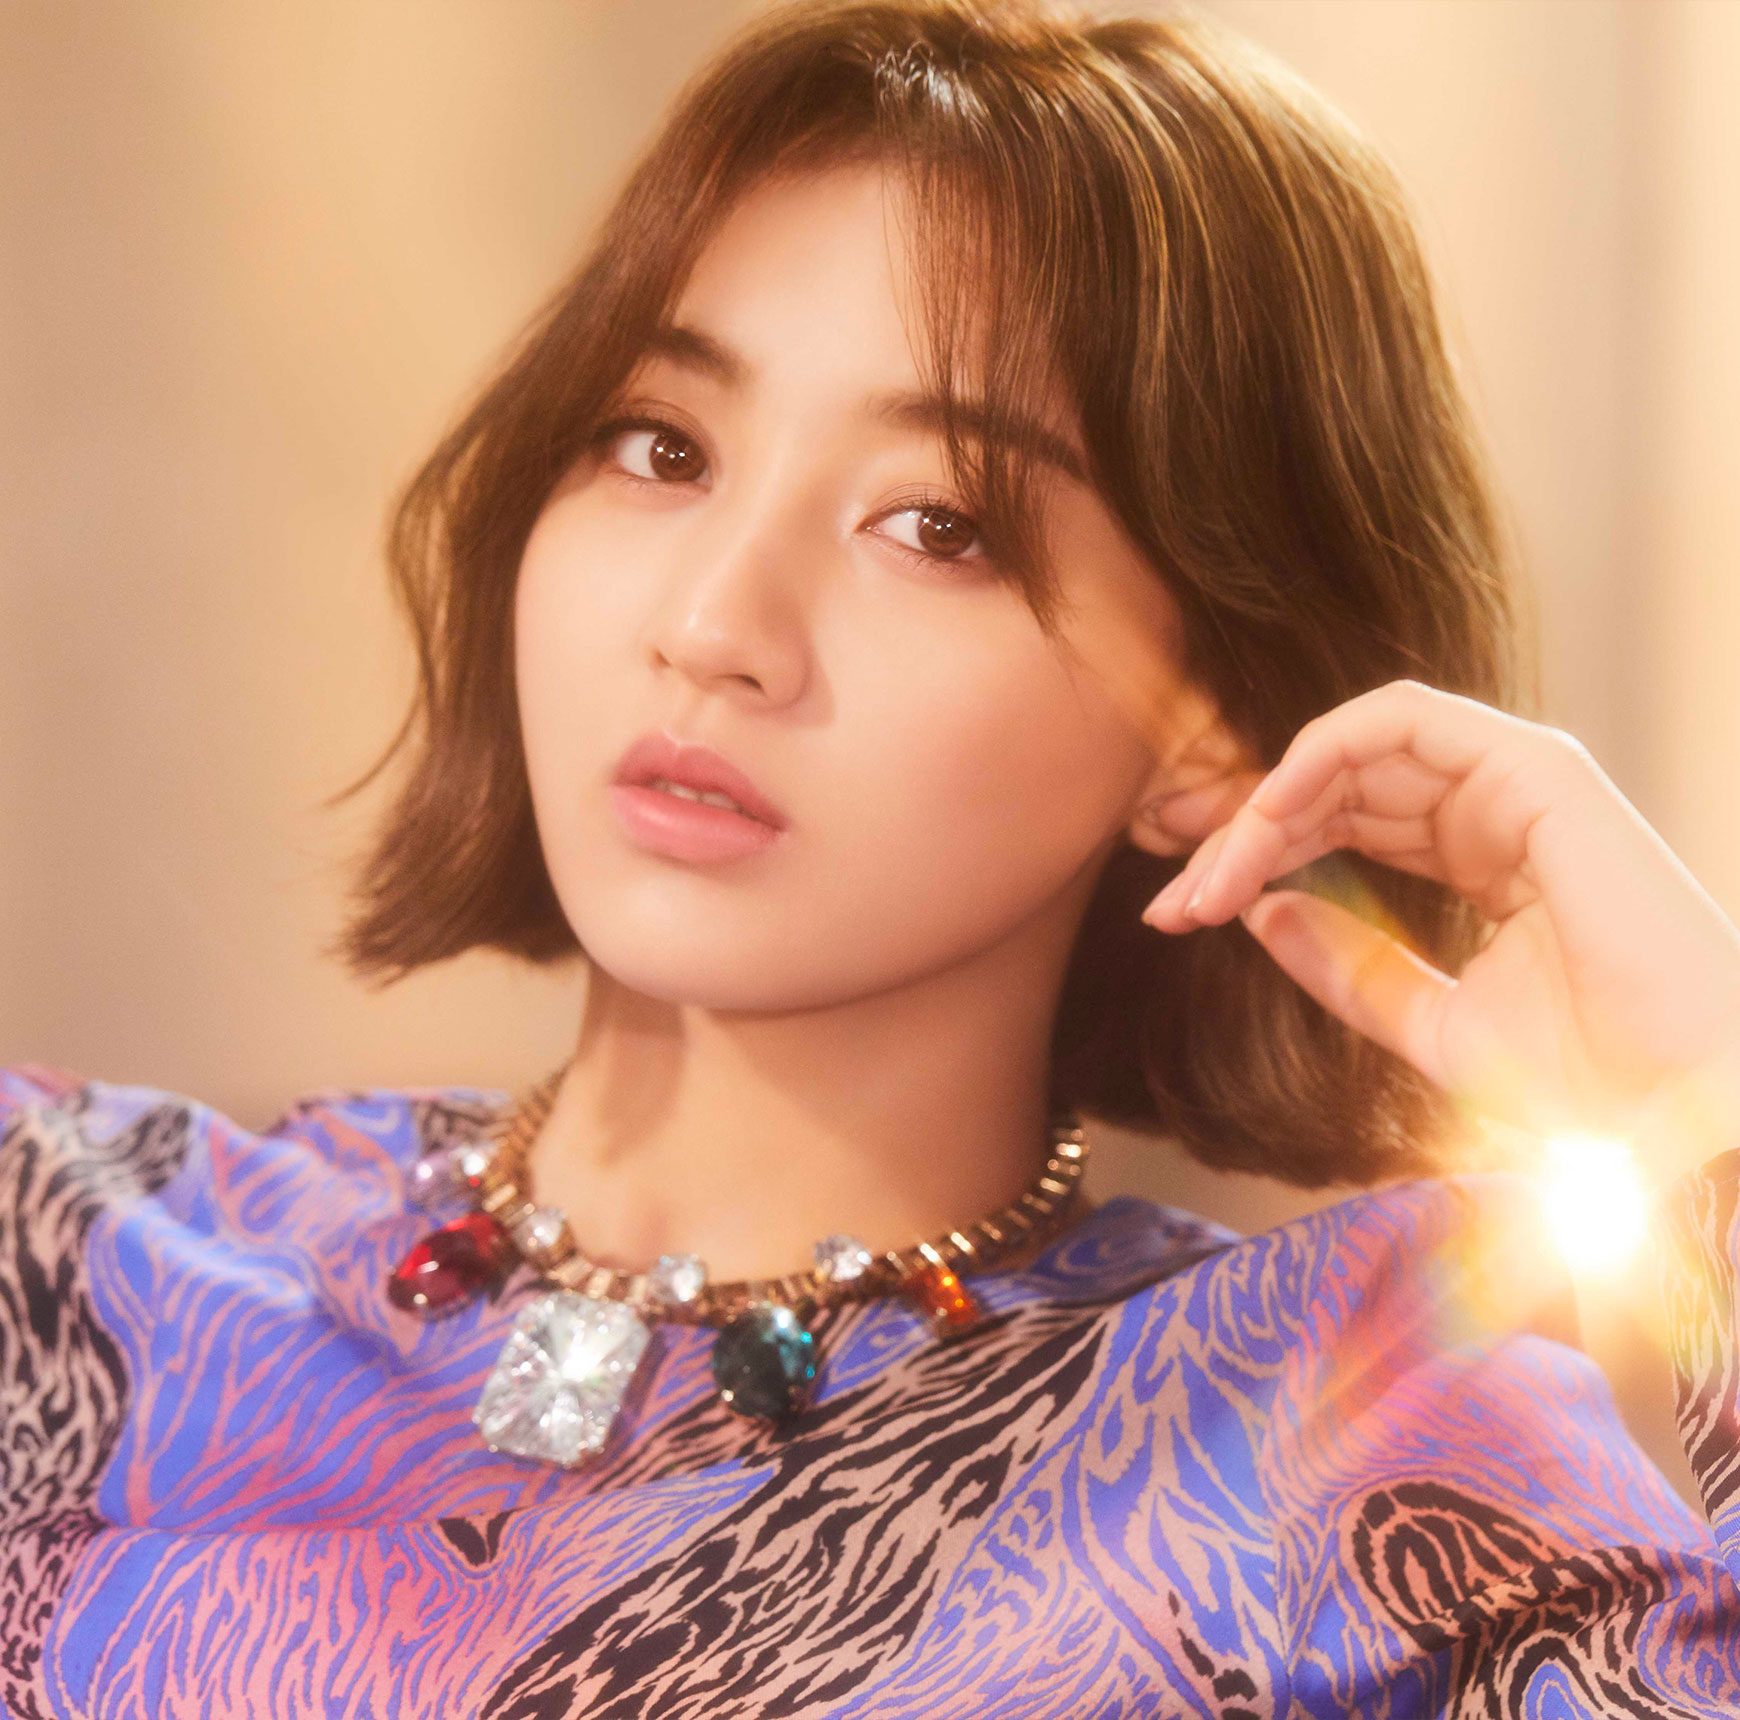 Twice S Jihyo Addresses V Live Comments Gives Clarification That